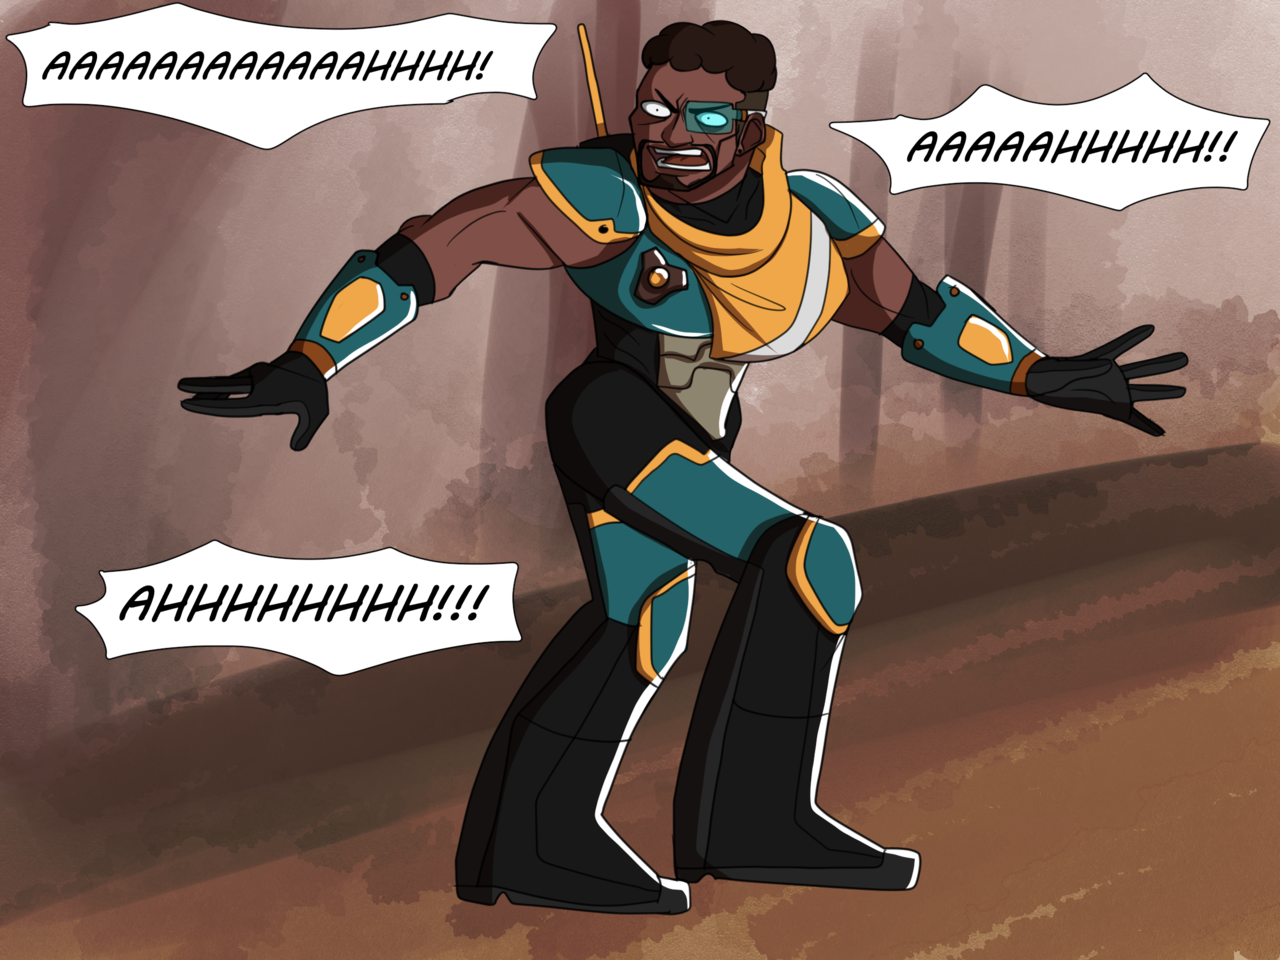 Why are you running!? - Comics, , Overwatch, Baptiste, Doomfist, Memes